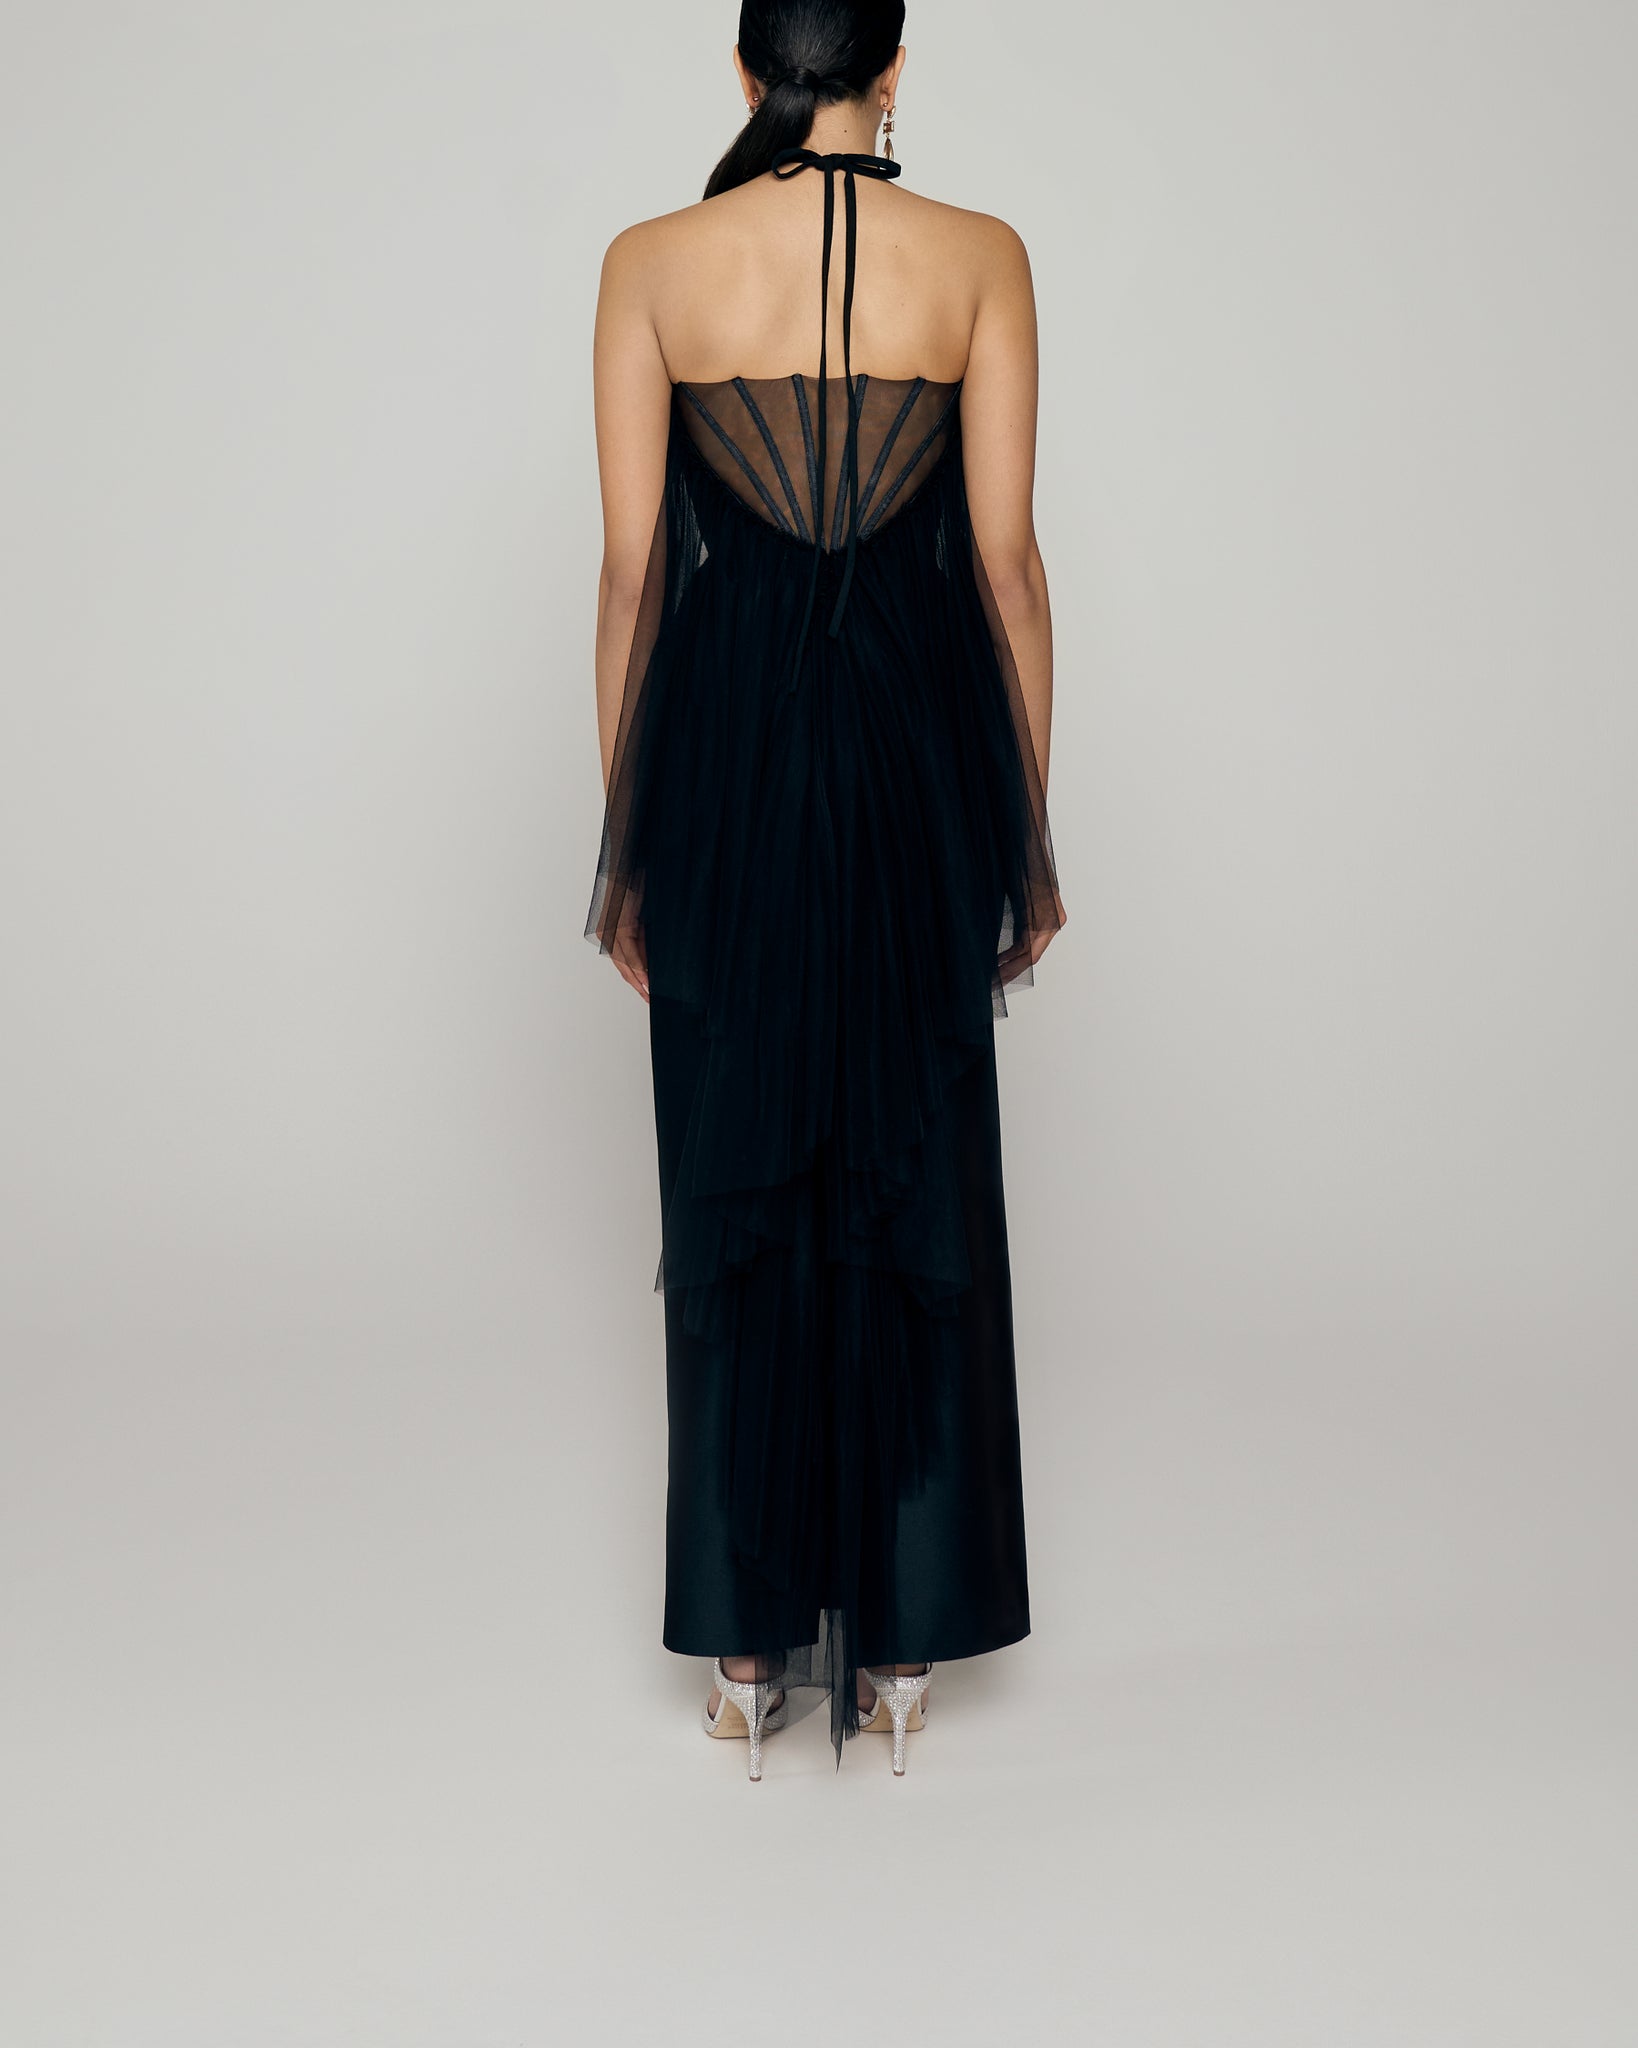 Strapless Pique gown with corset back and tulle fringe drape train and choker